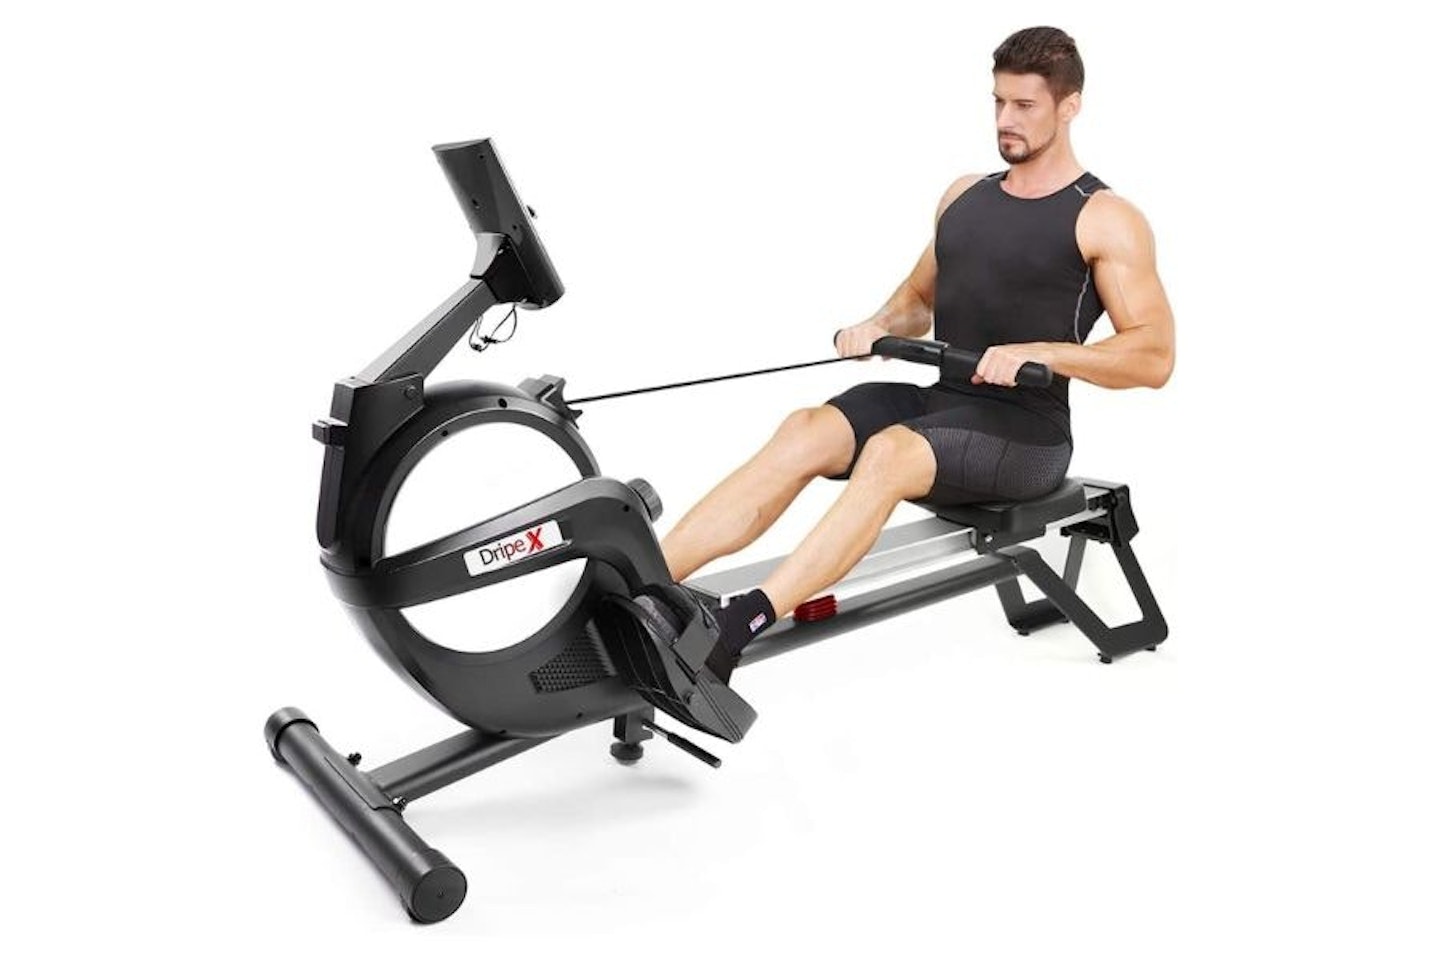 Dripex Magnetic Rowing Machine